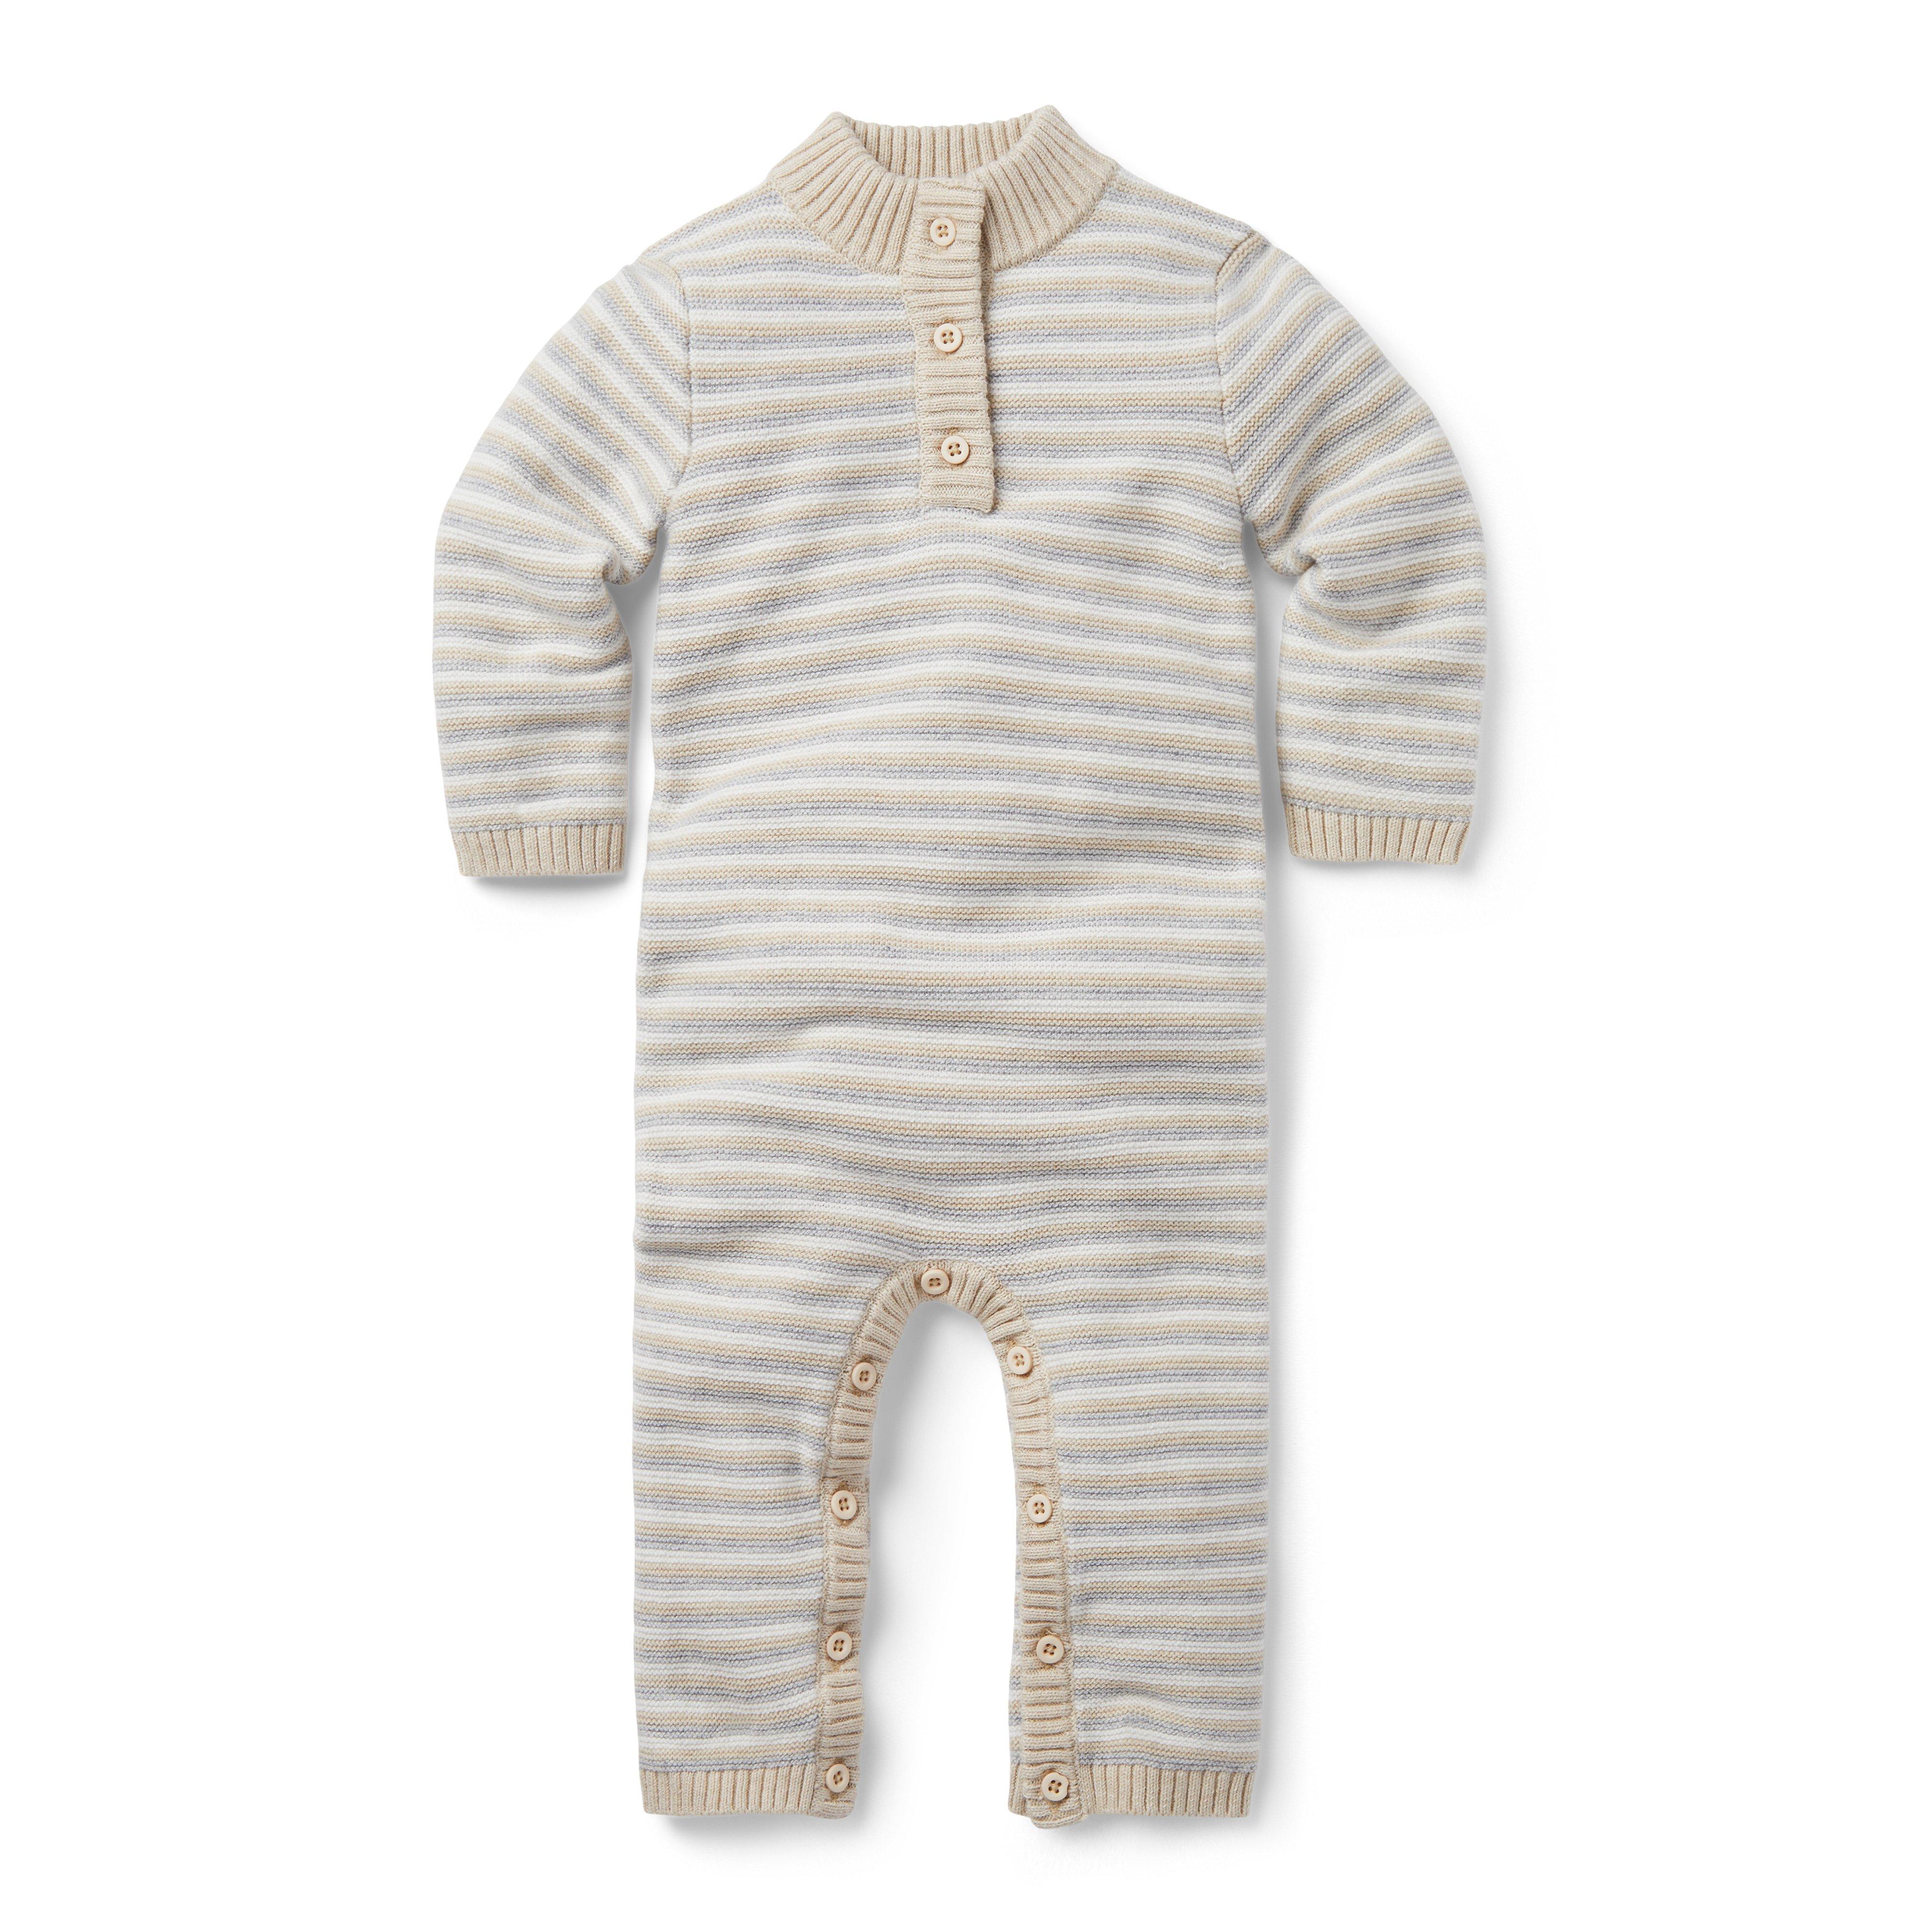 Newborn One-Pieces on Sale at Janie and Jack